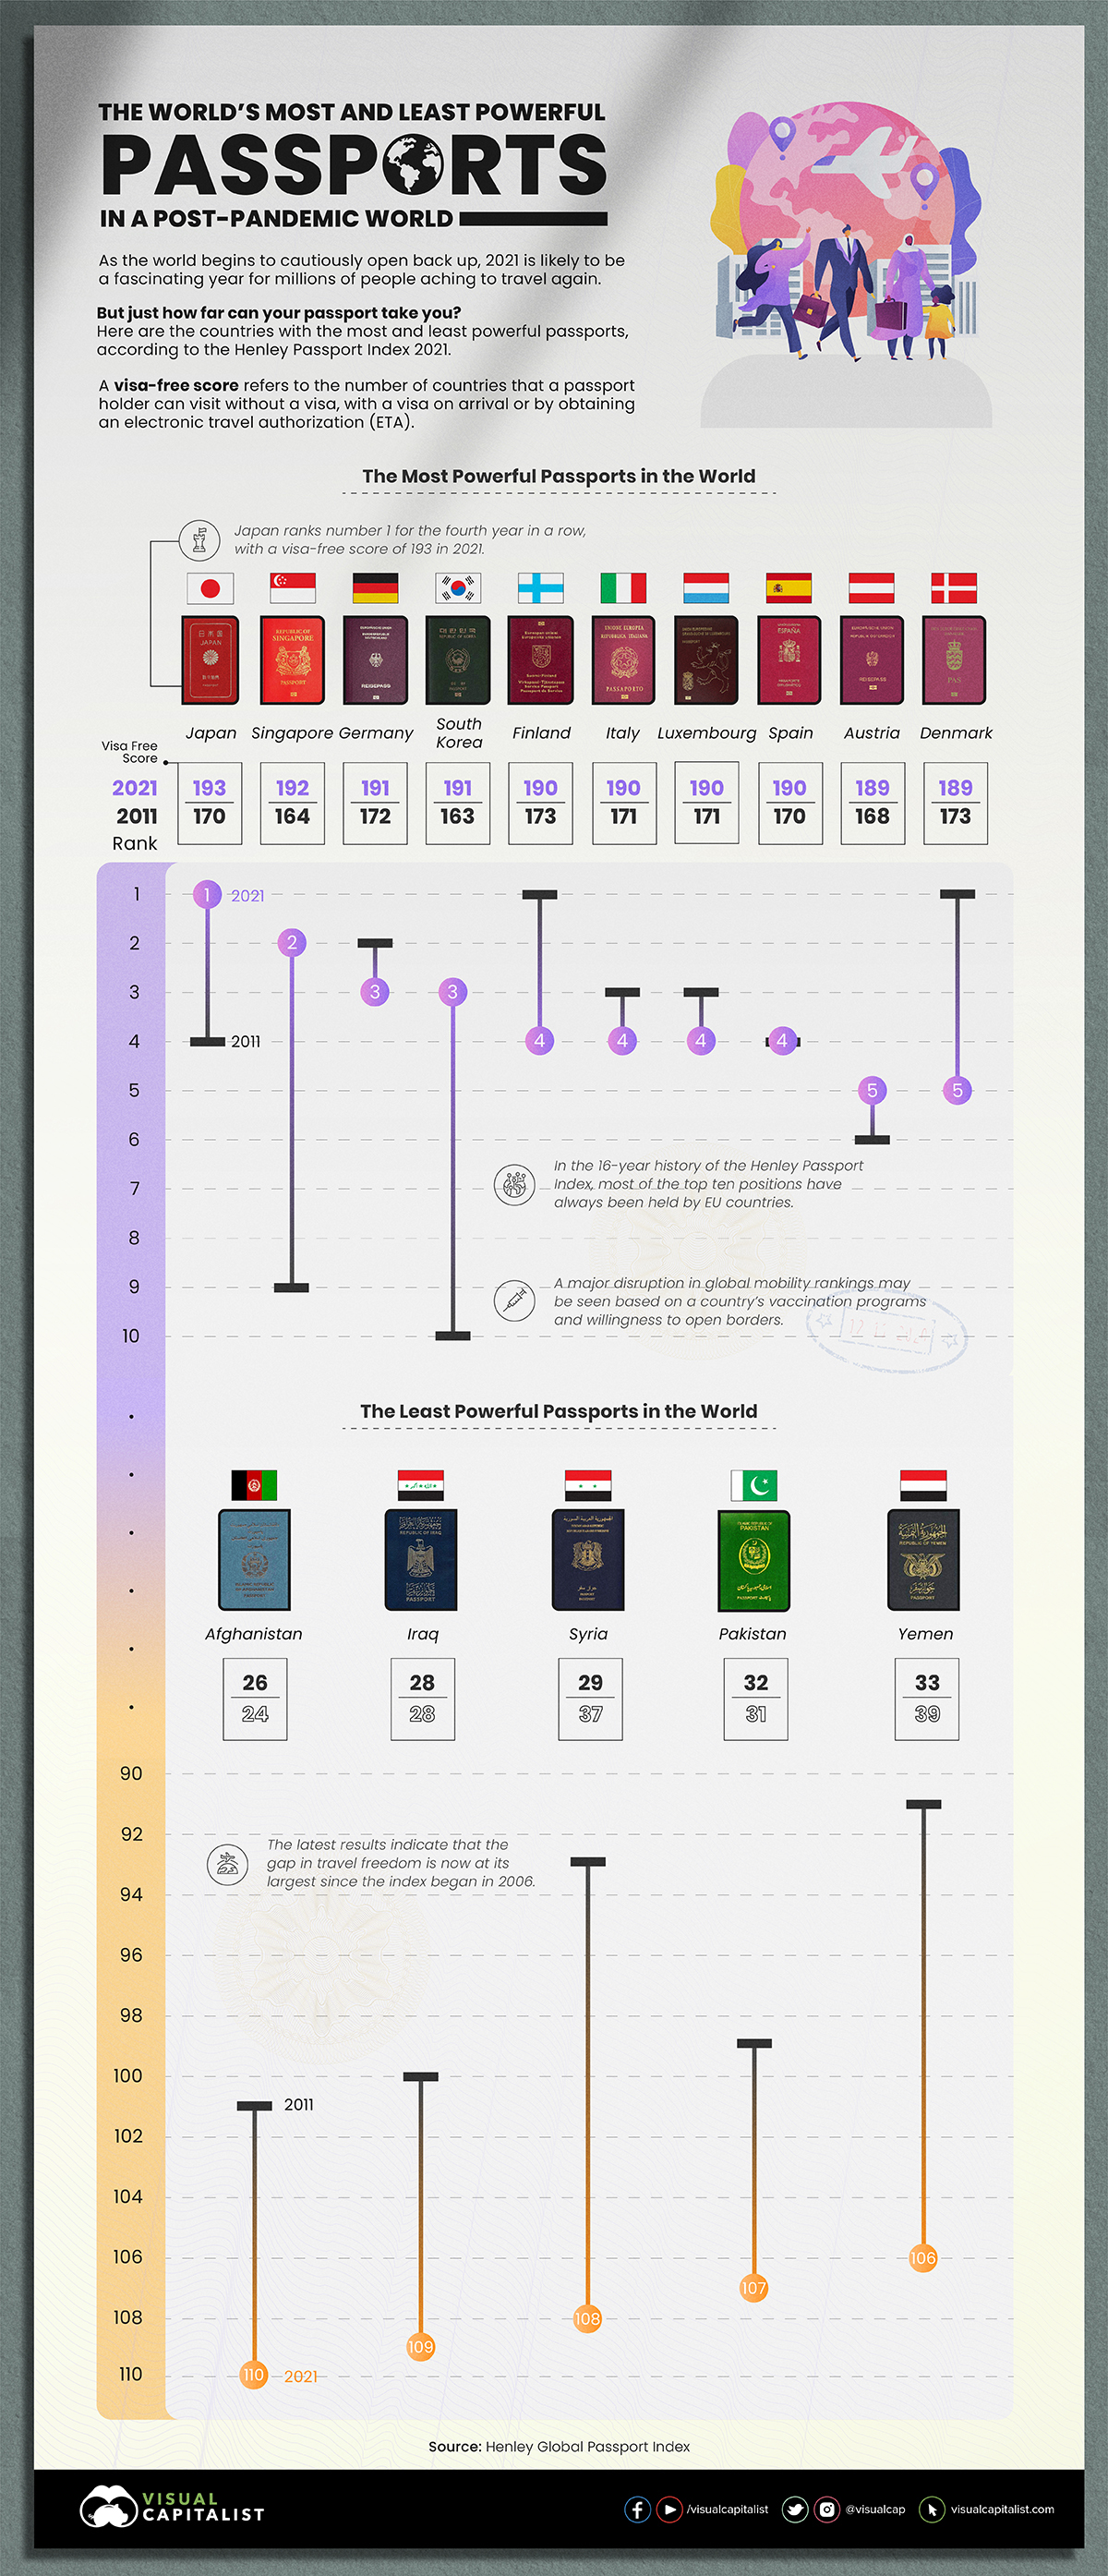 How Powerful is Your Passport in a PostPandemic World?